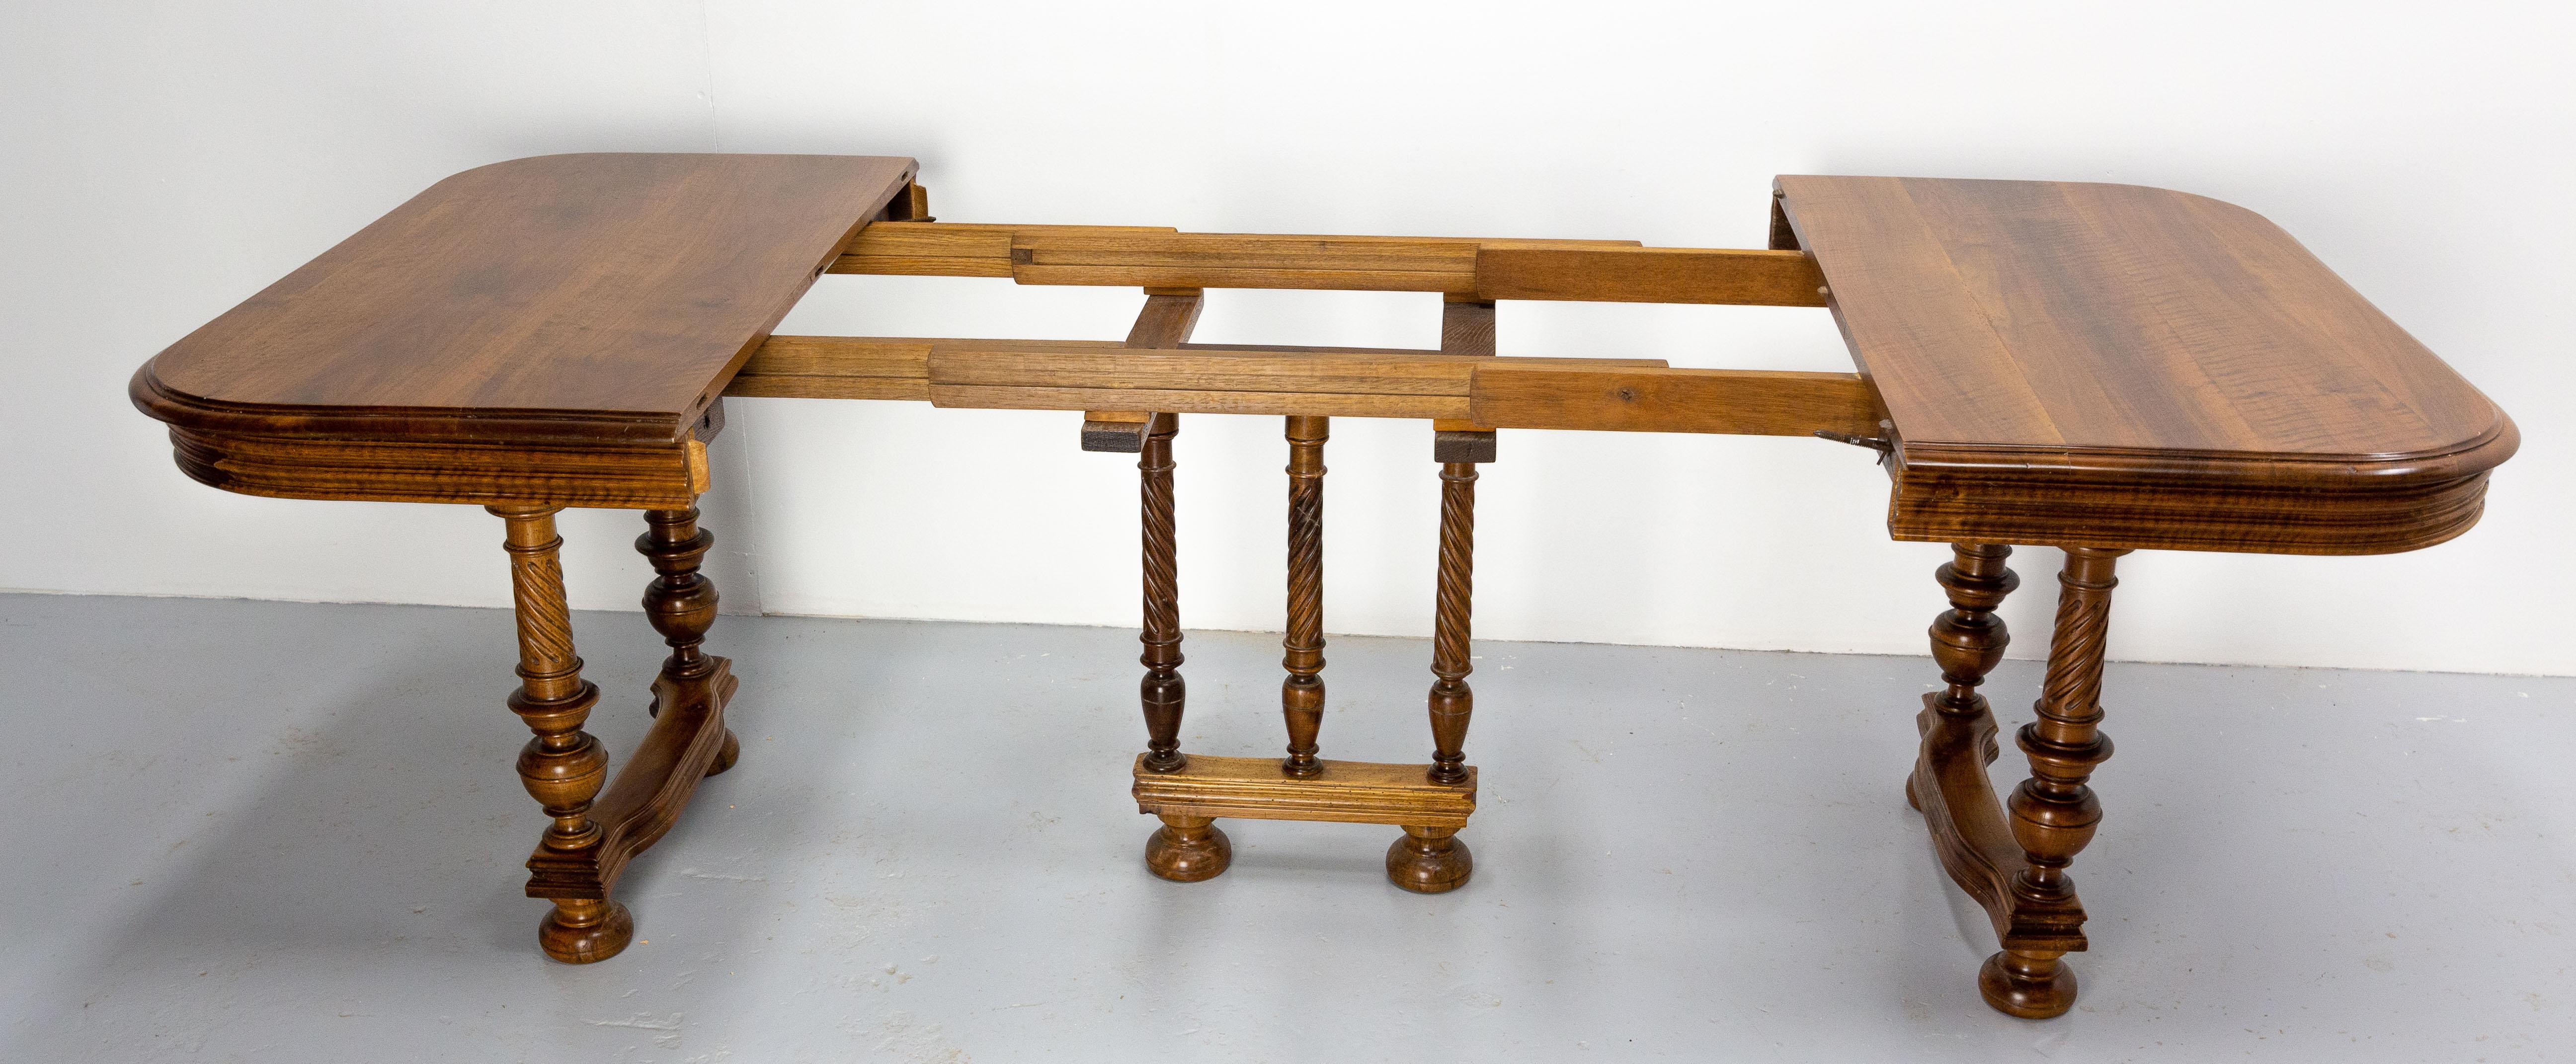 French Beech Dining Extended Table Louis XIII Style, Late 19th Century For Sale 5